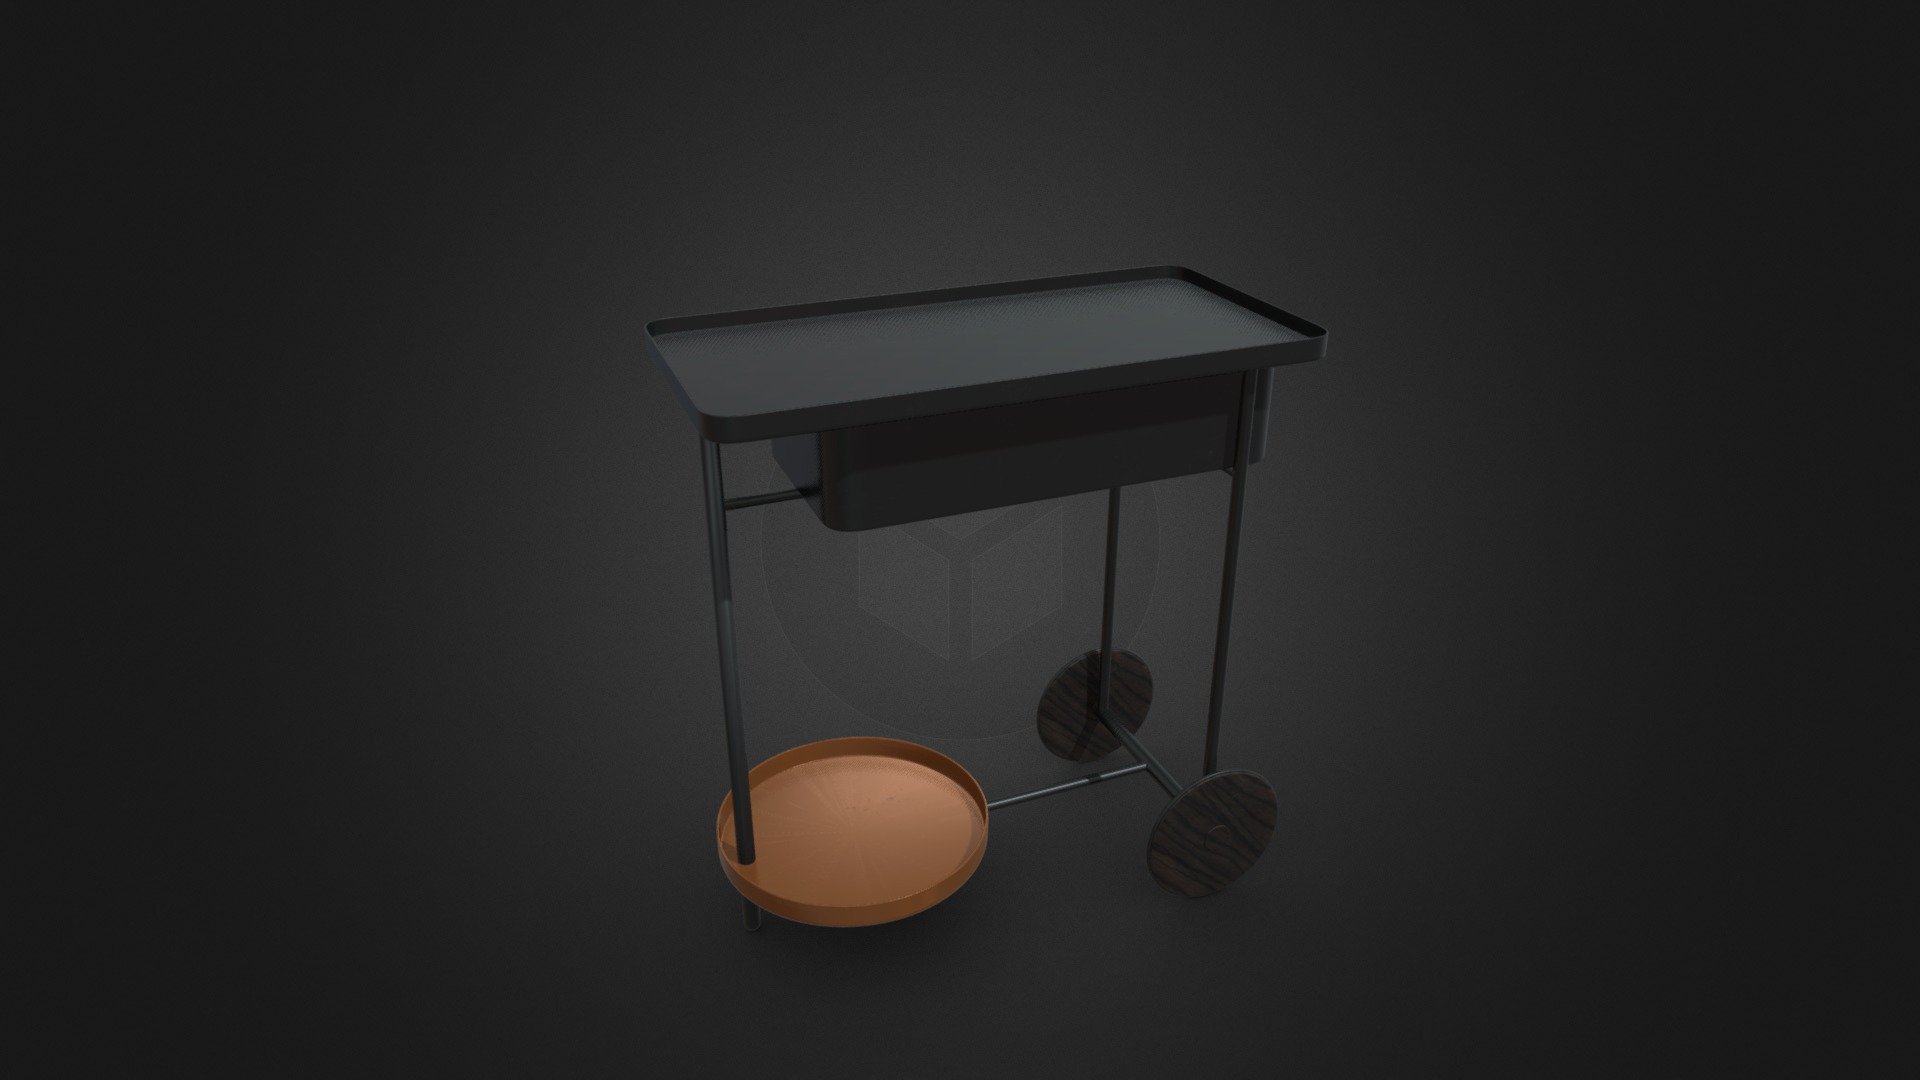 Measurements :

Height: 810mm

Width: 755mm

Depth: 370mm


3d model of a Float Serving Cart by Miras. 
Best use for adding detail on your Architectural Visualization or Interior Design.
This product is made in Blender and ready to render in Cycle. Unit setup is metres and the models are scaled to match real life objects. 
The model comes with textures and materials and is positioned in the center of the coordinates system.

No additional plugin is needed to open the model.



Notes:


Geometry: Polygonal
Textures: Yes 
Rigged: No
Animated: No
UV Mapped: Yes
Unwrapped UVs: Yes, non-overlapping

Bake all map



Note: don't forget to take a few seconds to rate this product, your support will allow me to continue working .
Thanks in advance for your help and happy blending!



Hope you like it! Thank you!



My youtube channel : https://www.youtube.com/toss90 - Float Serving Cart By Miras - Buy Royalty Free 3D model by Toss90 3d model